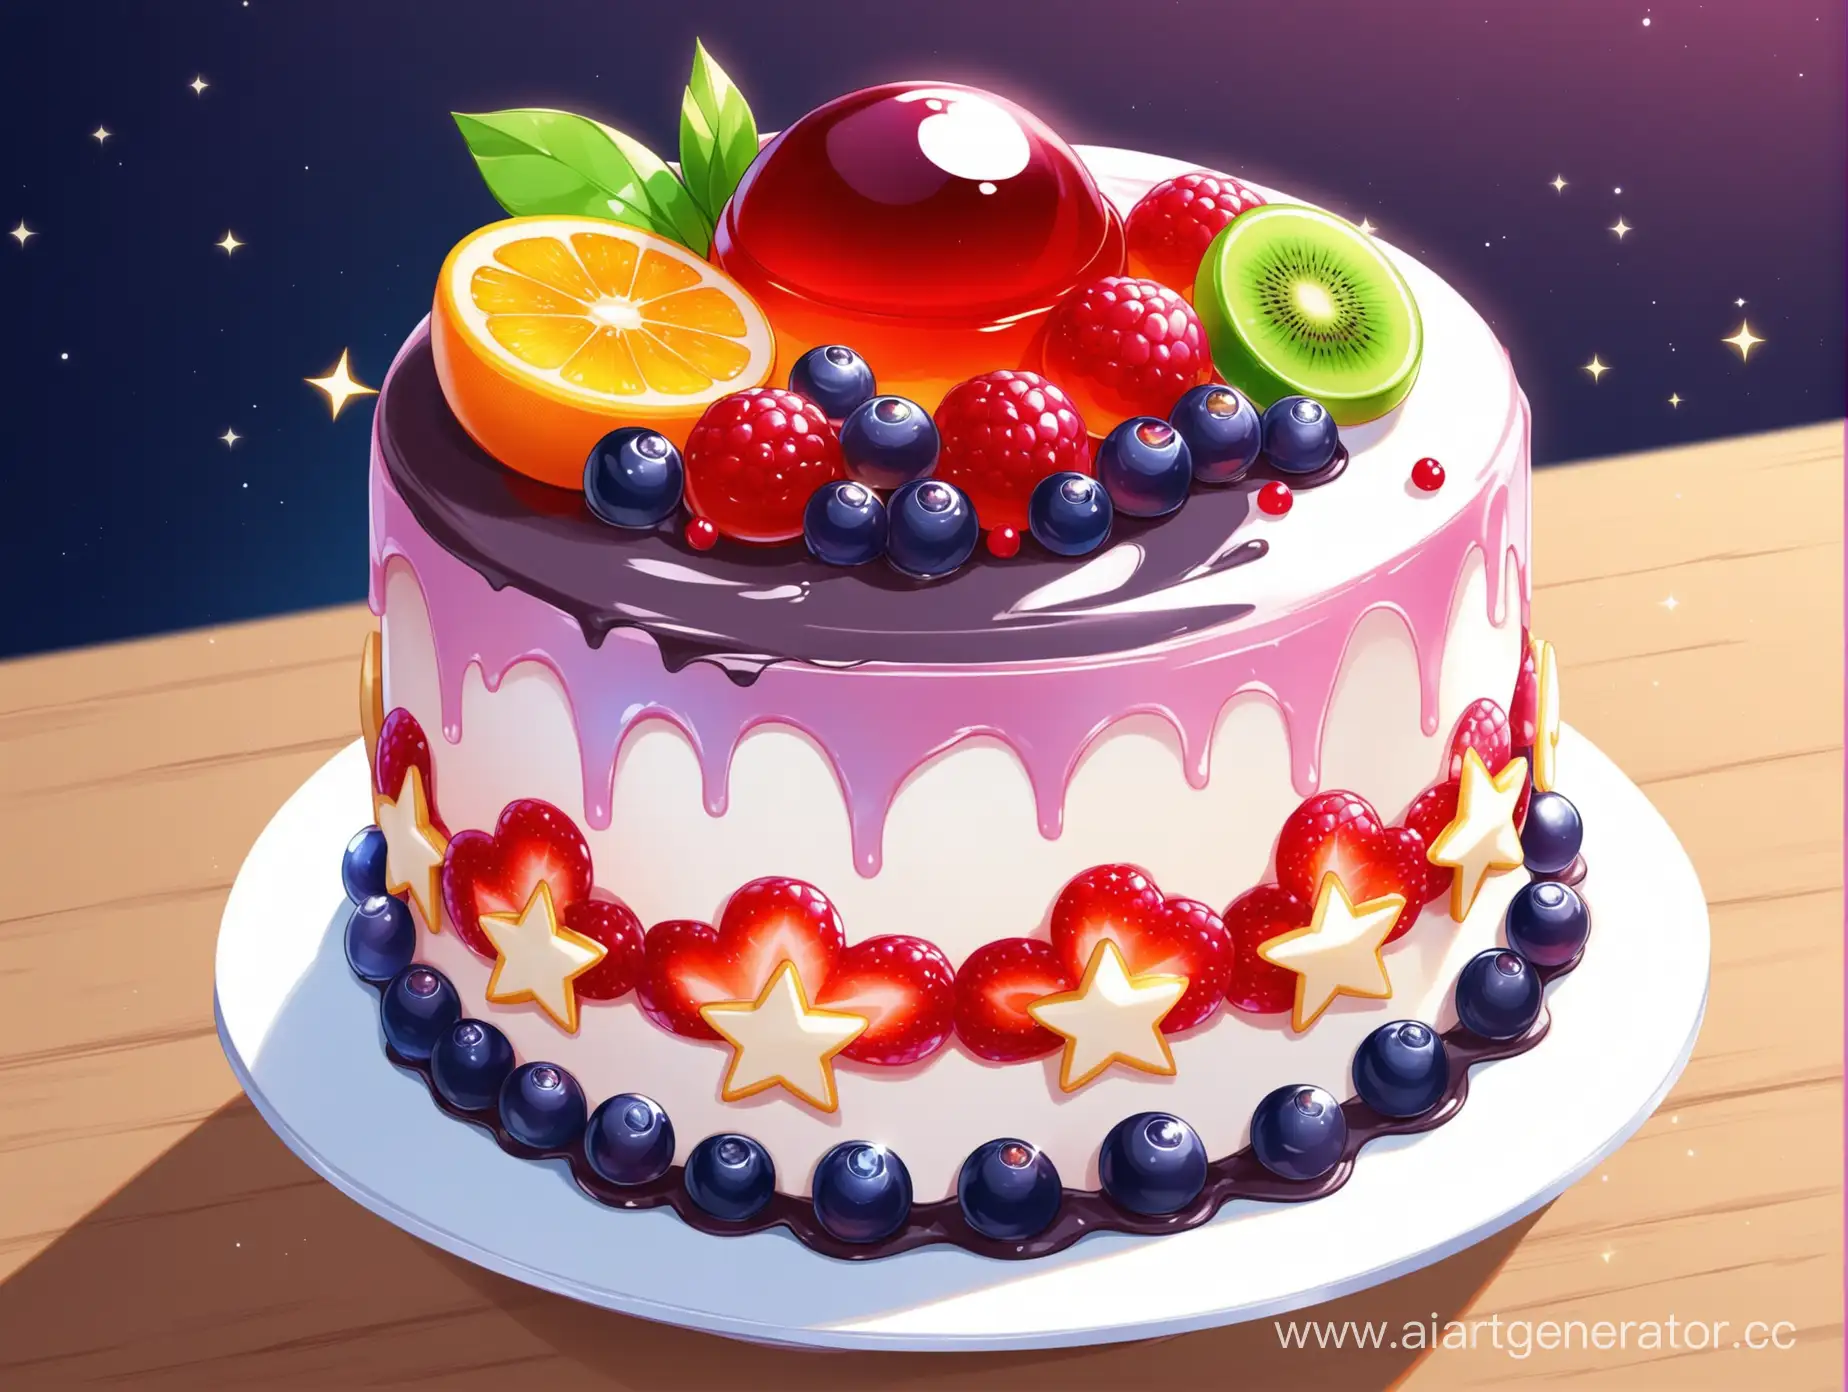 Colorful-AnimeInspired-Cake-with-Jelly-and-Fruits-Honkai-Star-Rail-Delight